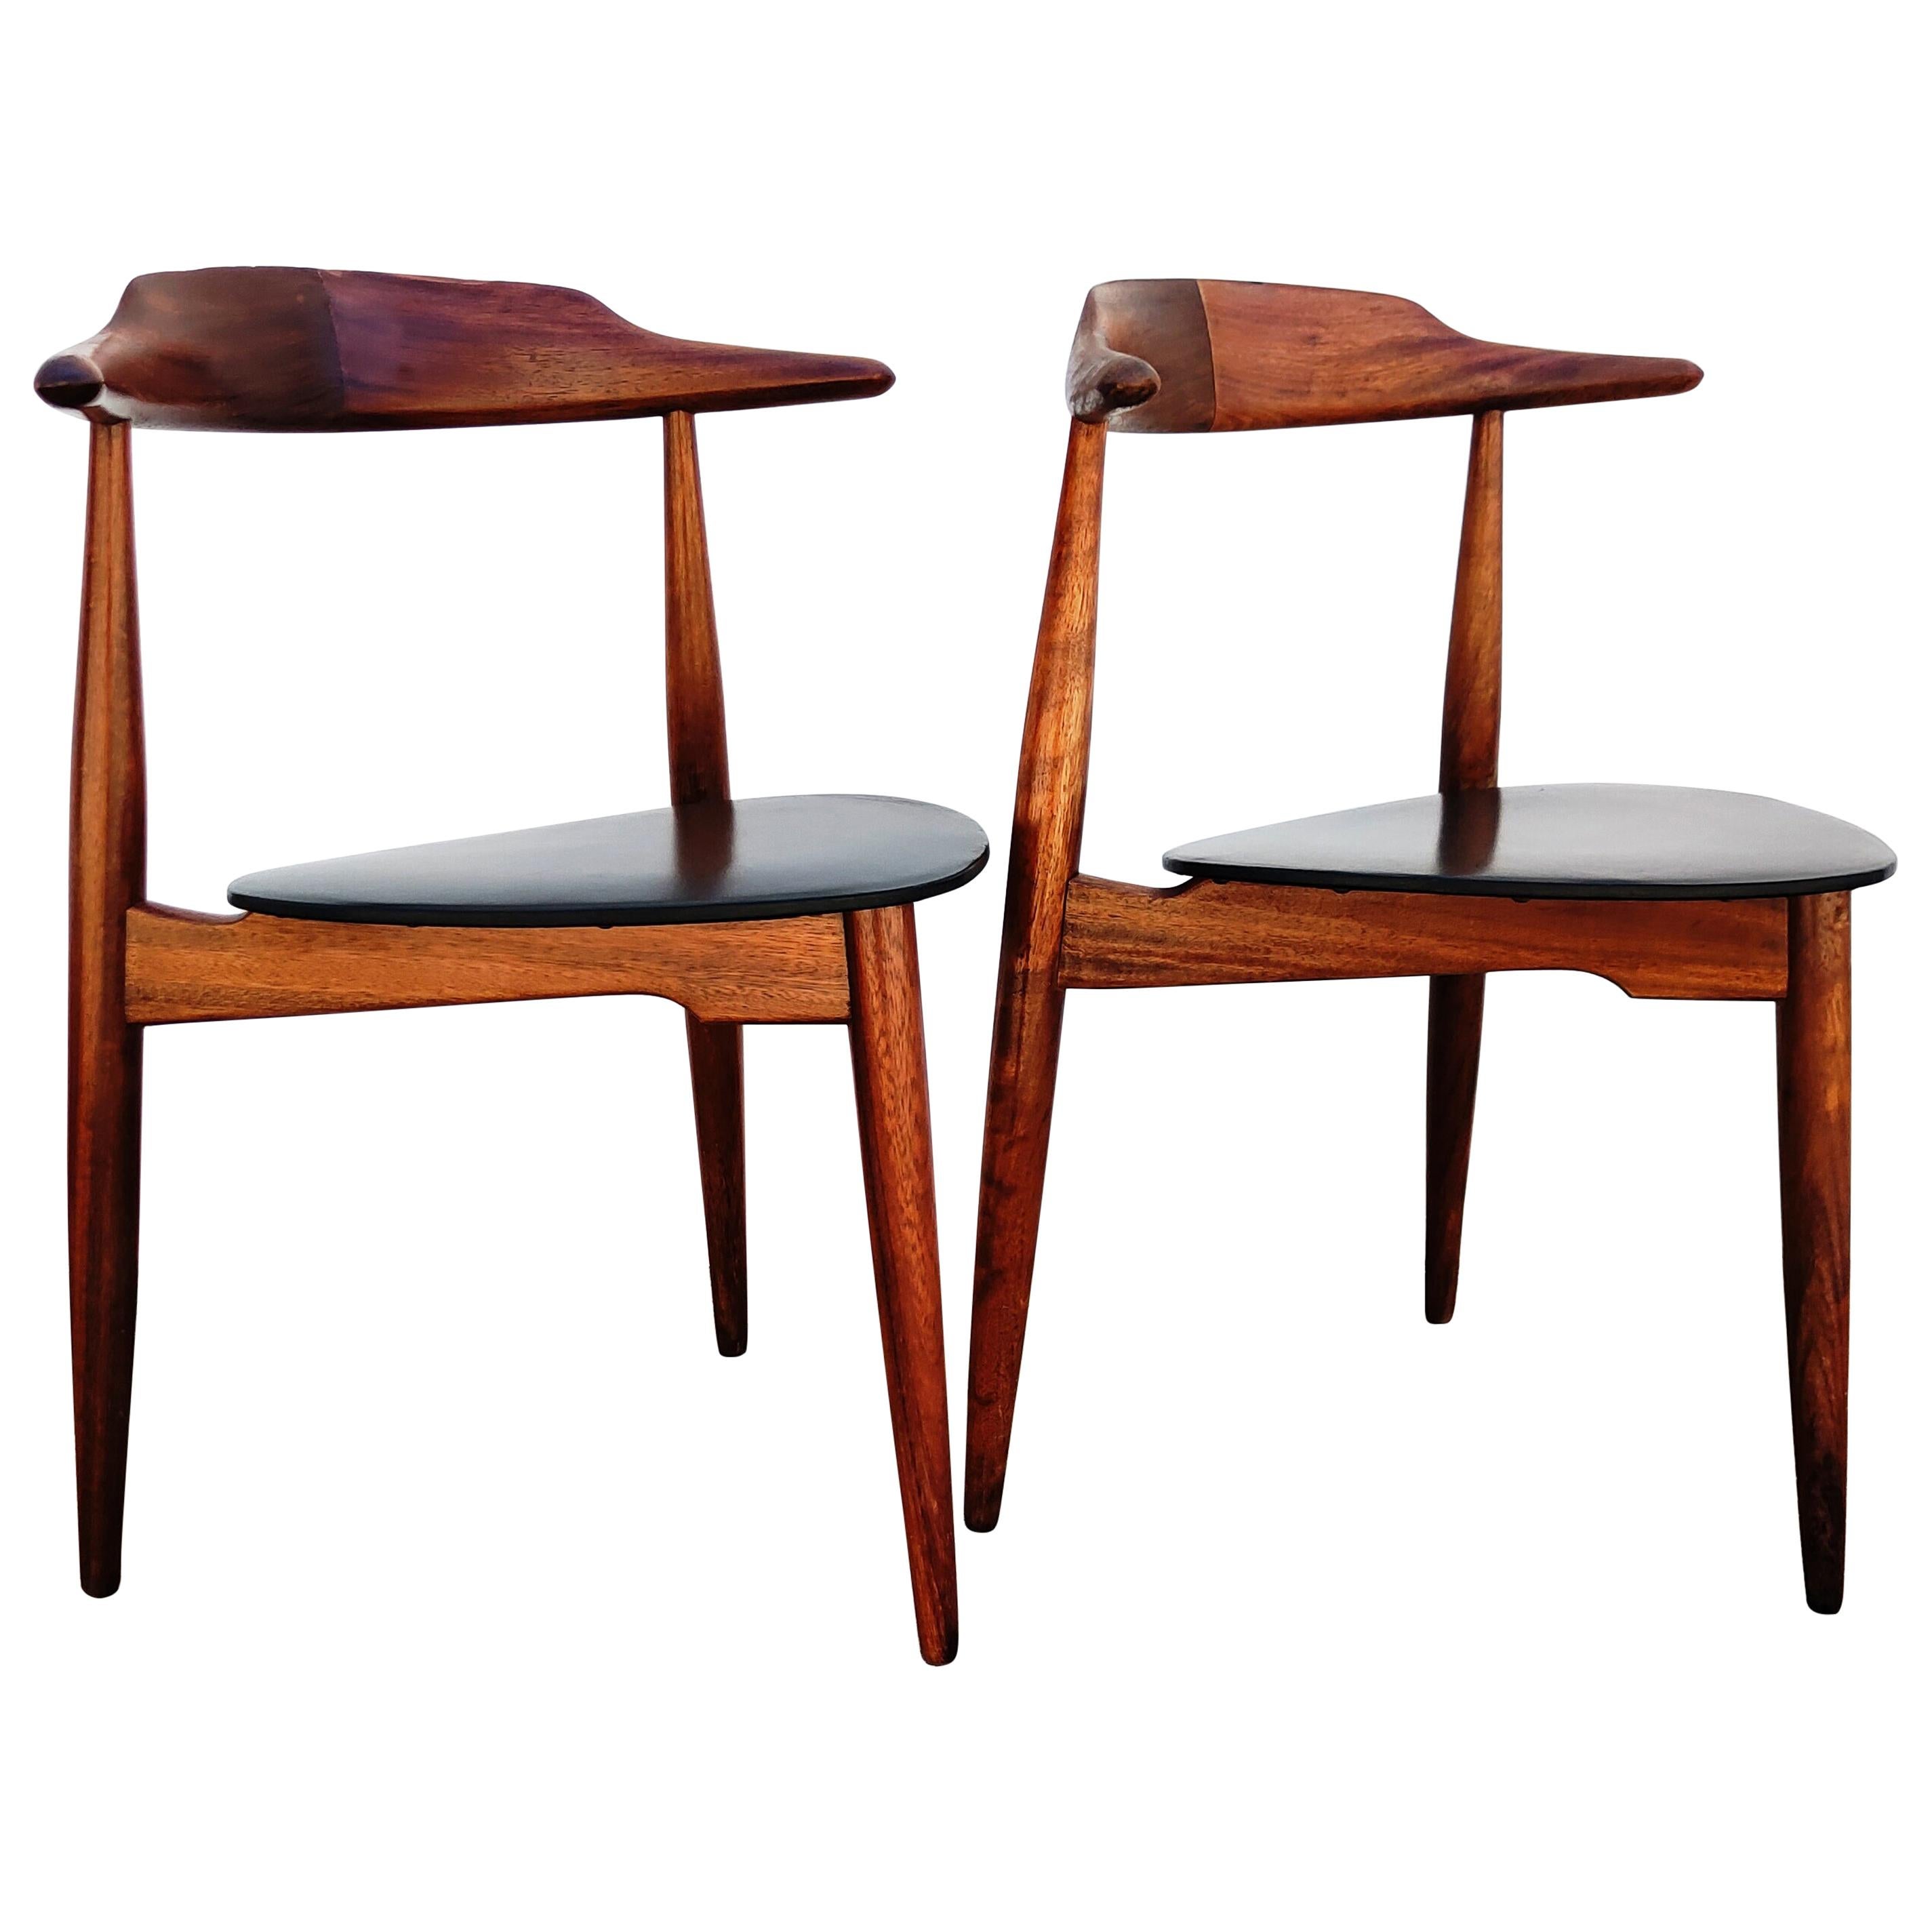 Set of Two Model Chairs "Heart FH-4103" Designed by Hans J. Wegner, 1950s